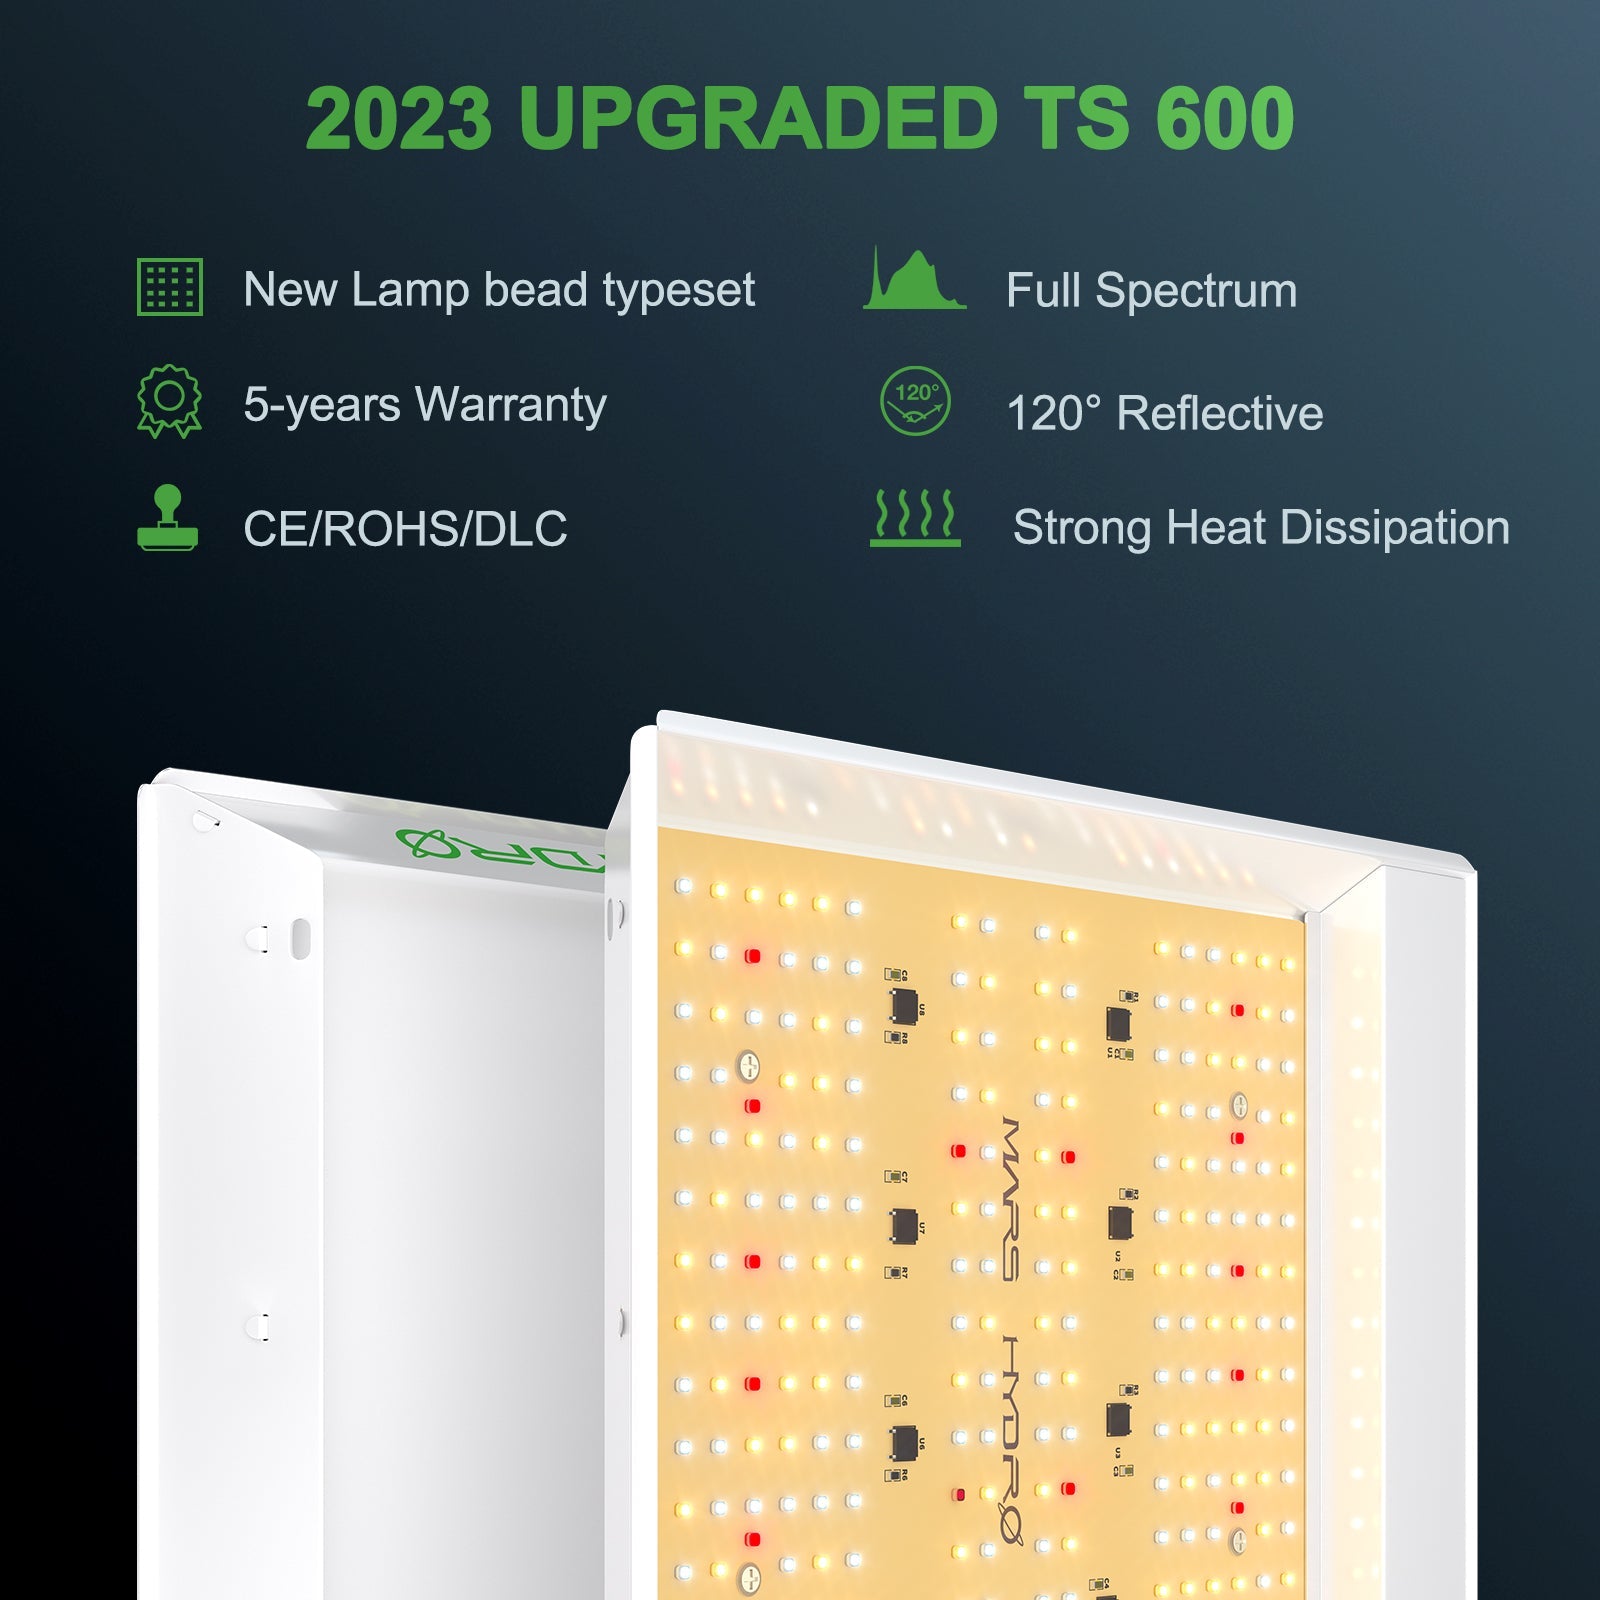 [90% new] Used - TS 600 LED Grow Light Full Spectrum Hydroponics Indoor Lamp for Veg Flower All Stages Plants